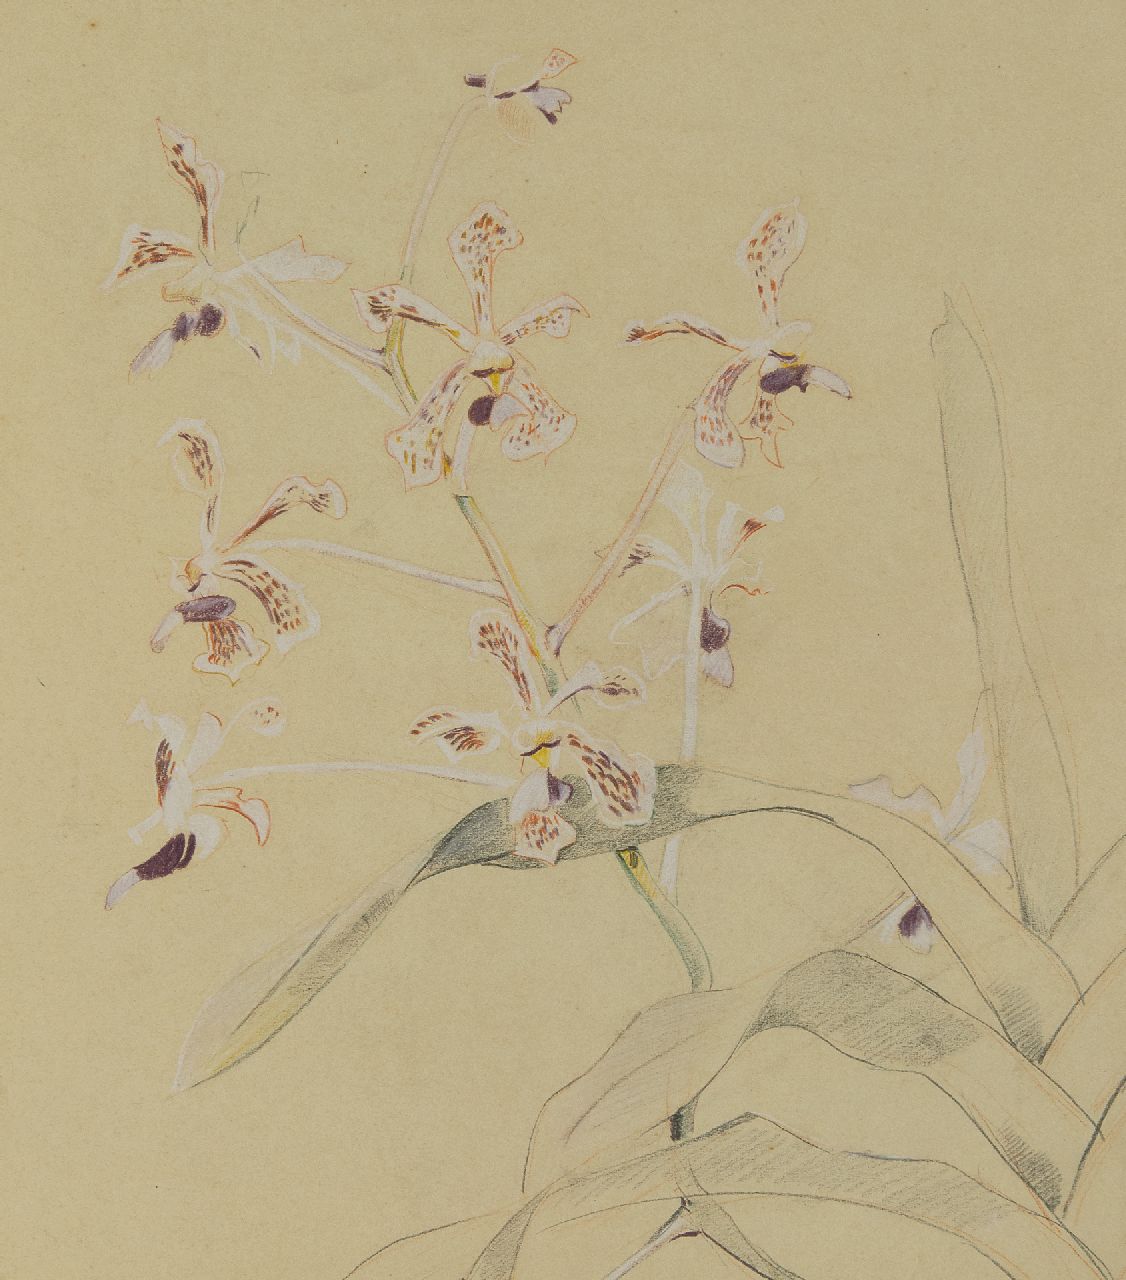 Bruigom M.C.  | Margaretha Cornelia 'Greta' Bruigom | Watercolours and drawings offered for sale | Orchid branch, pencil, chalk and watercolour on paper 45.9 x 32.4 cm, signed l.r.